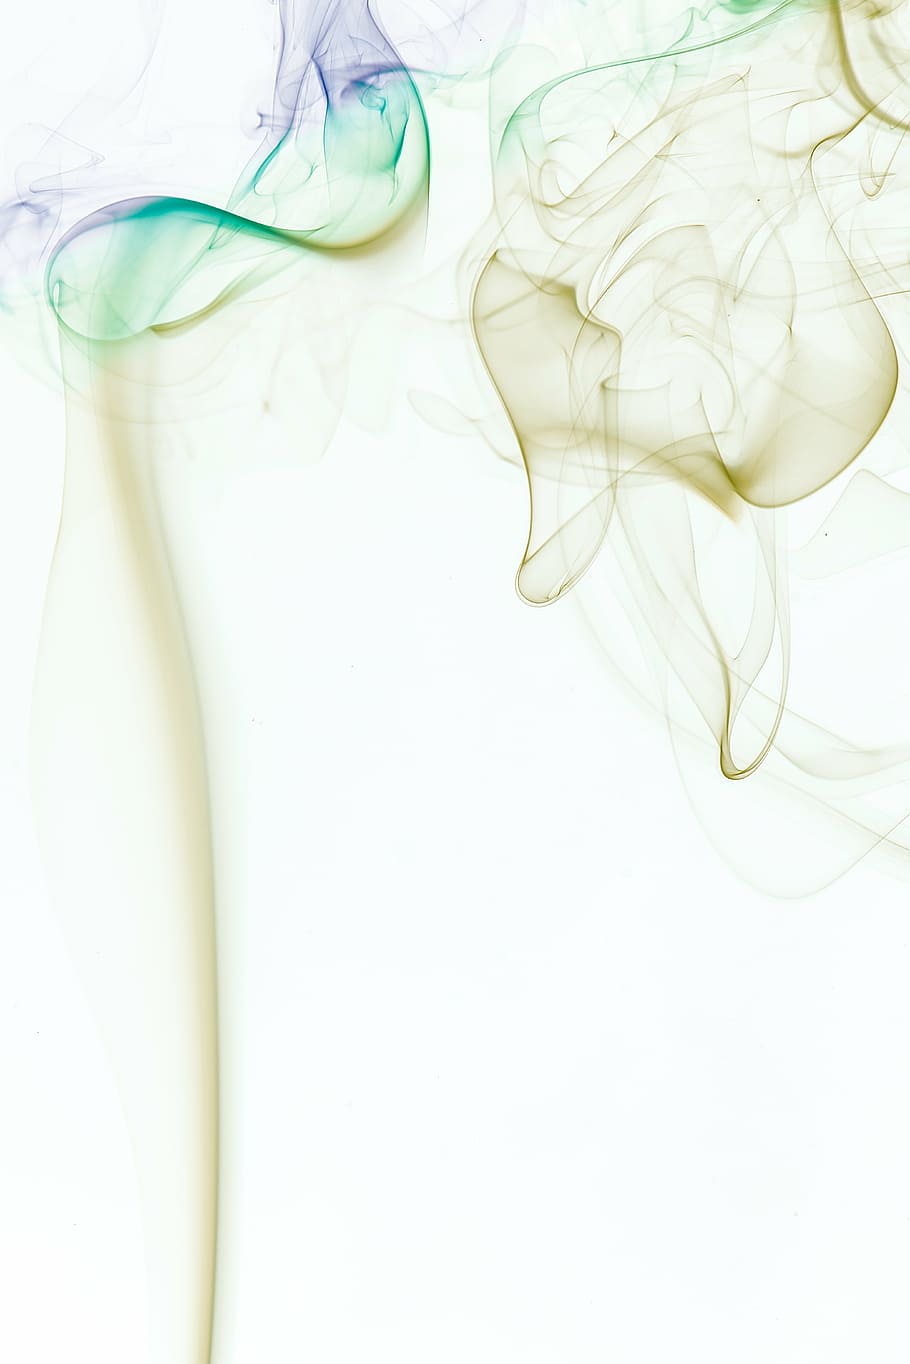 green, teal smoke design, abstraction, smoke, highlights, white background, indoors, studio shot, close-up, copy space